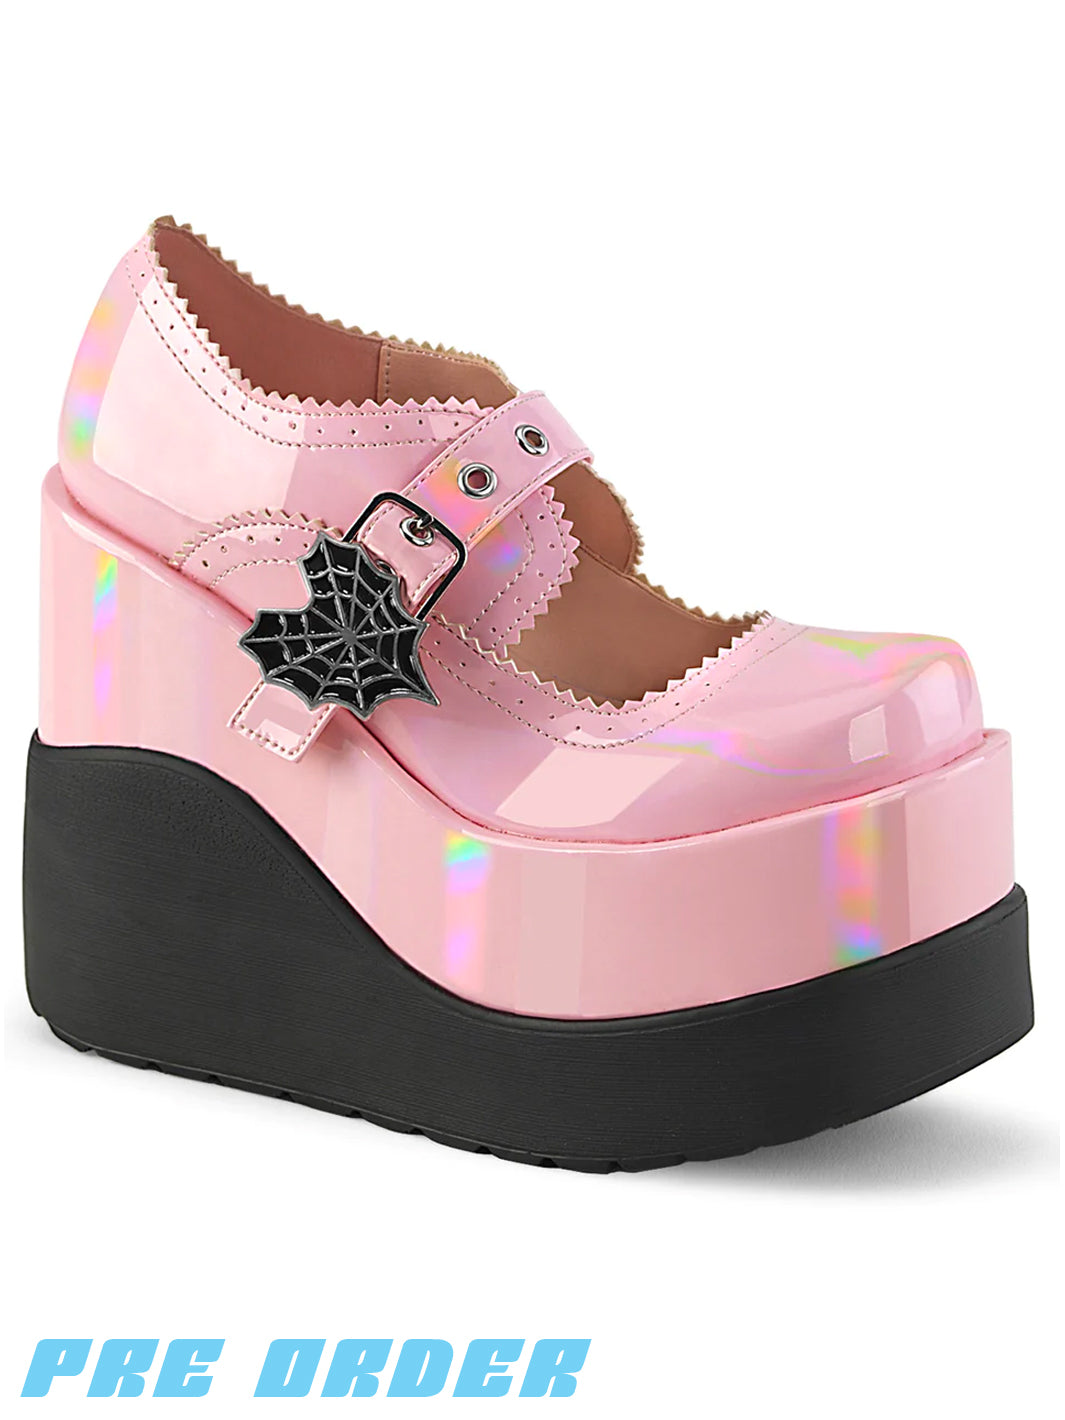 DEMONIA VOID-38 - PINK HOLO PATENT ✰ PRE ORDER ✰